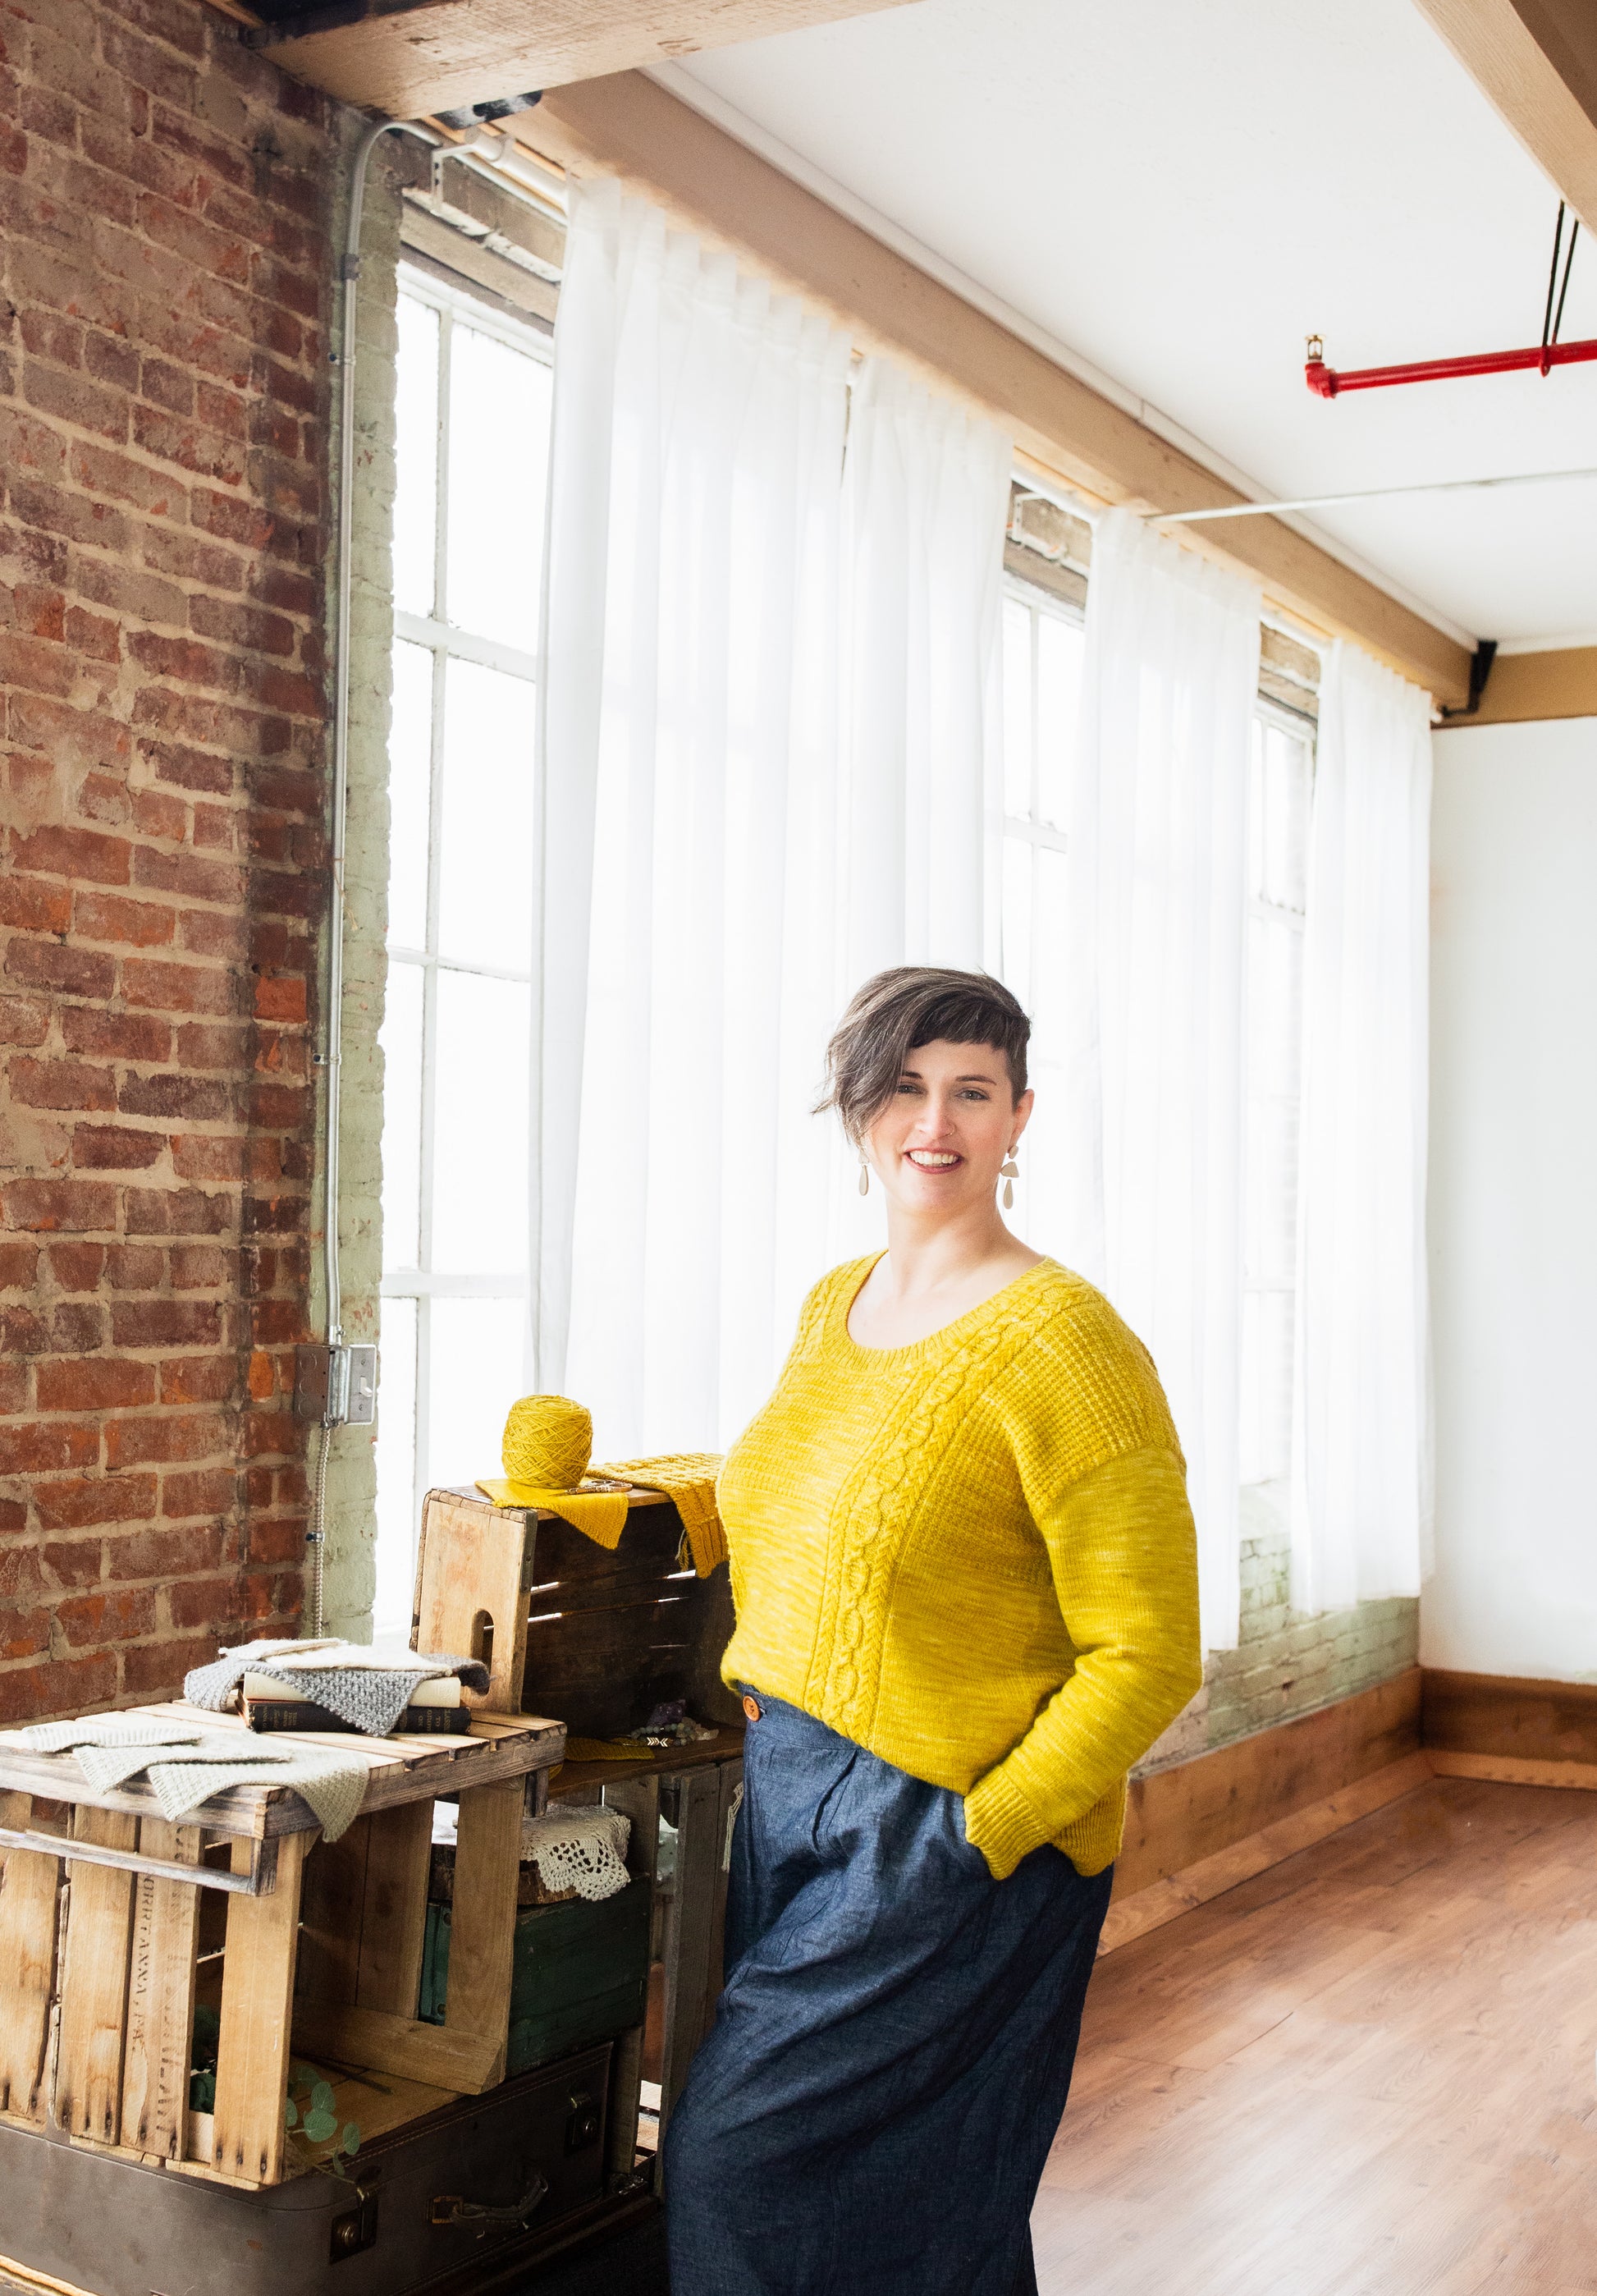 Seen at a 3/4 angle, Jen wears a bright yellow sweater with blue pants. The sweater is knit with a scoop neck and a cable and seed stitch design.